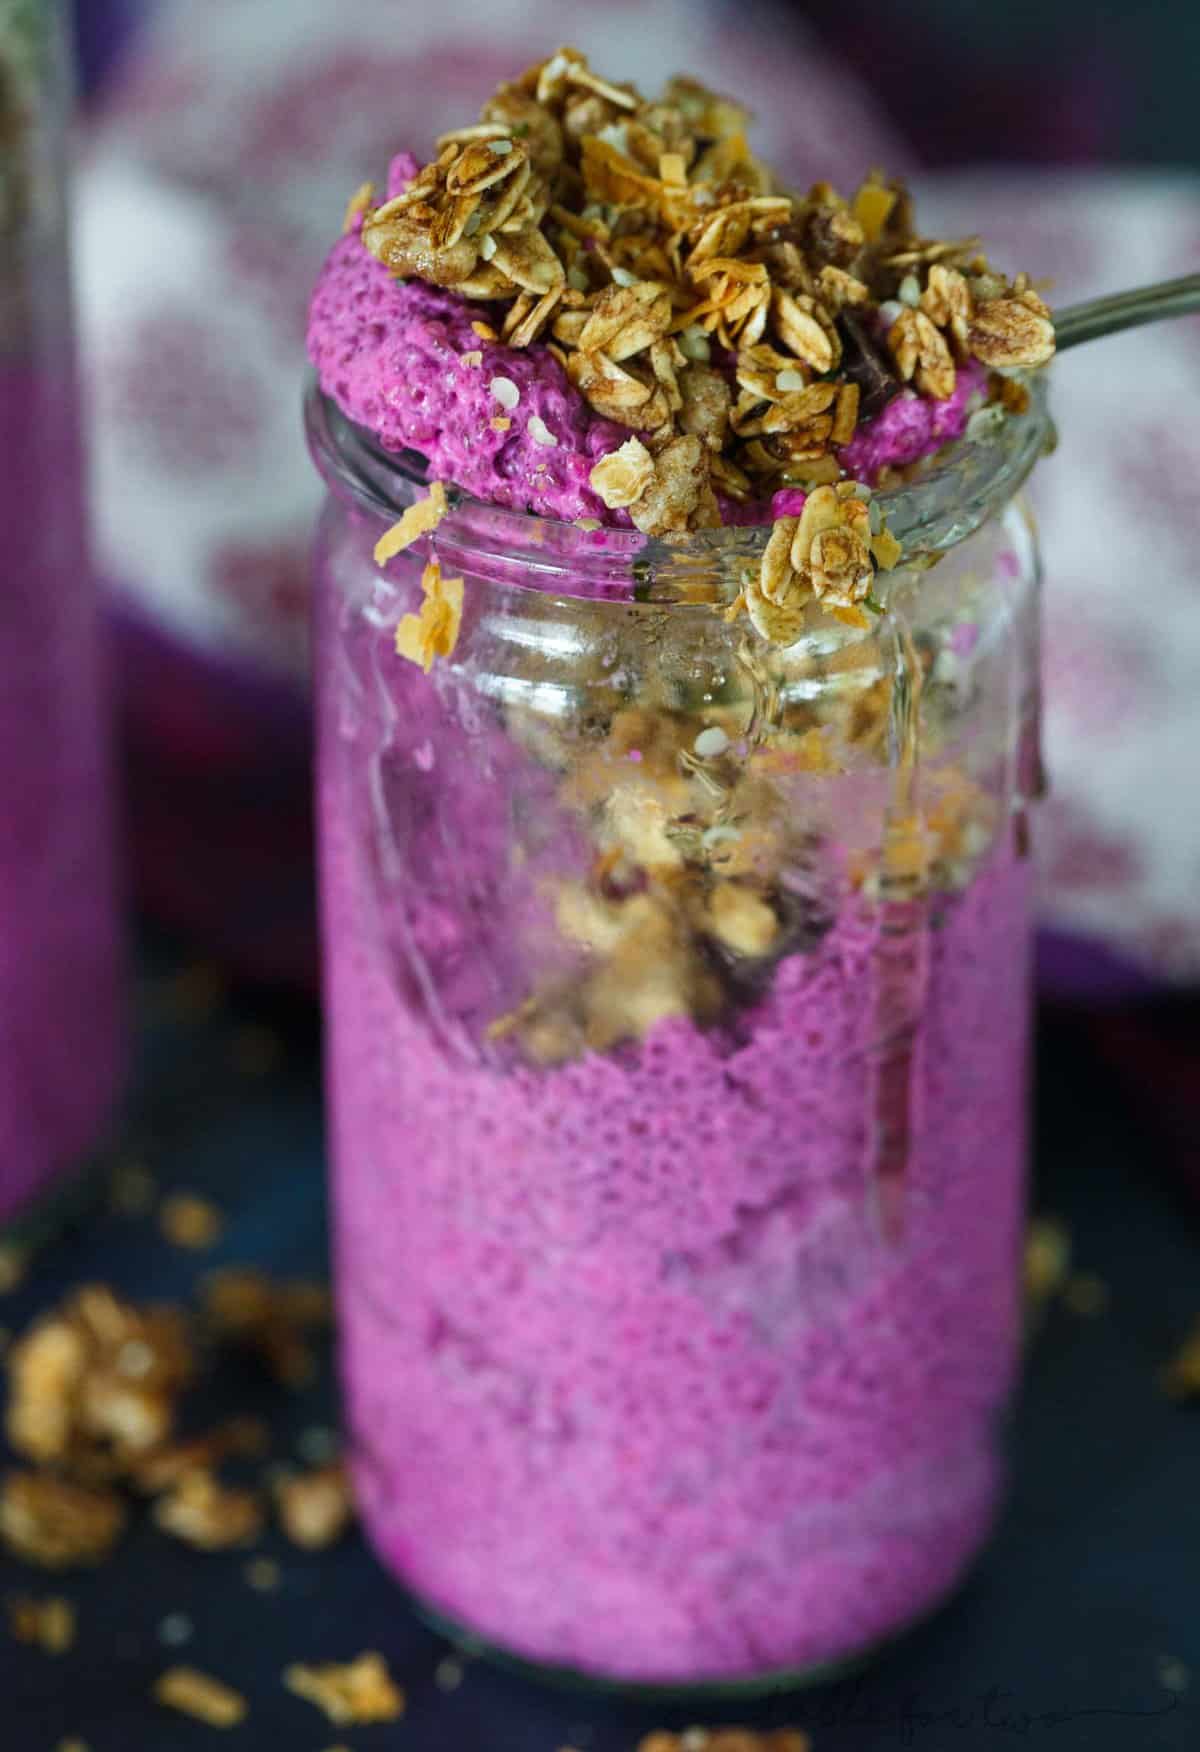 Pitaya coconut chia seed pudding is the easiest and prettiest overnight breakfast option to prep for the morning!